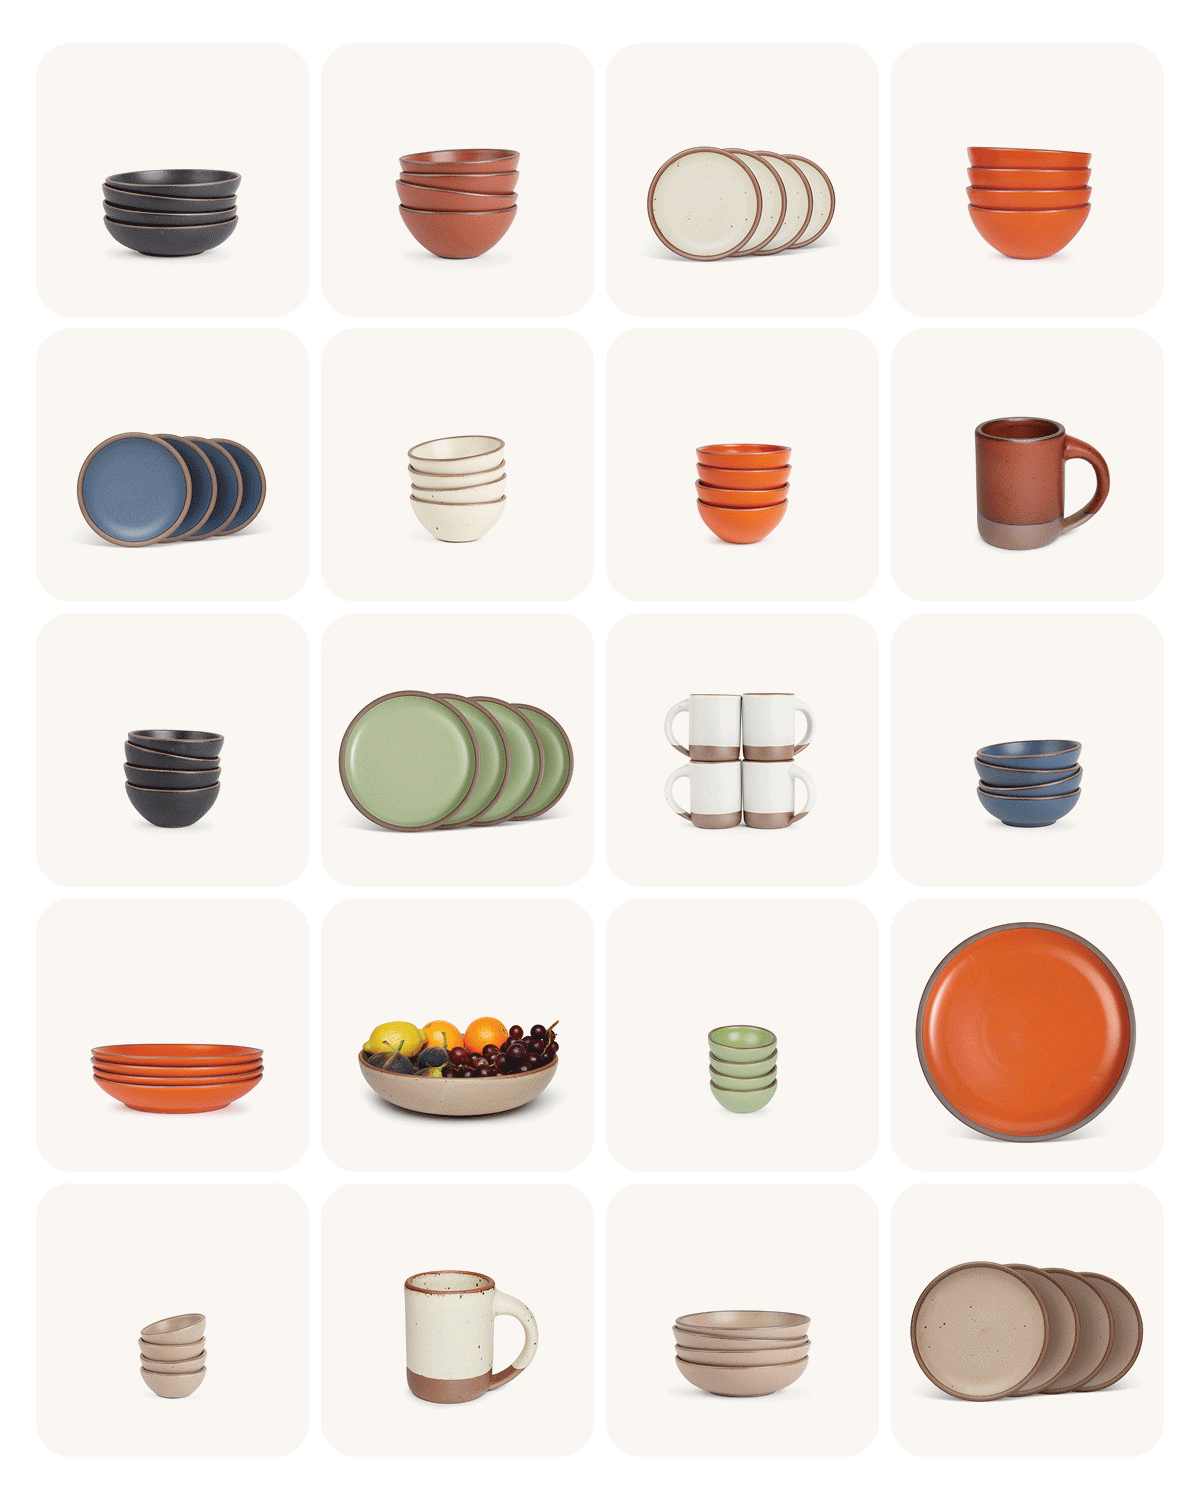 Moving gif of 20 different squares - each square contains an item of ceramic dinnerware - plates, bowls, mugs. Colors of the dinnerware include sage green, white, blue, cool terracotta, bold orange, charcoal, and neutrals.